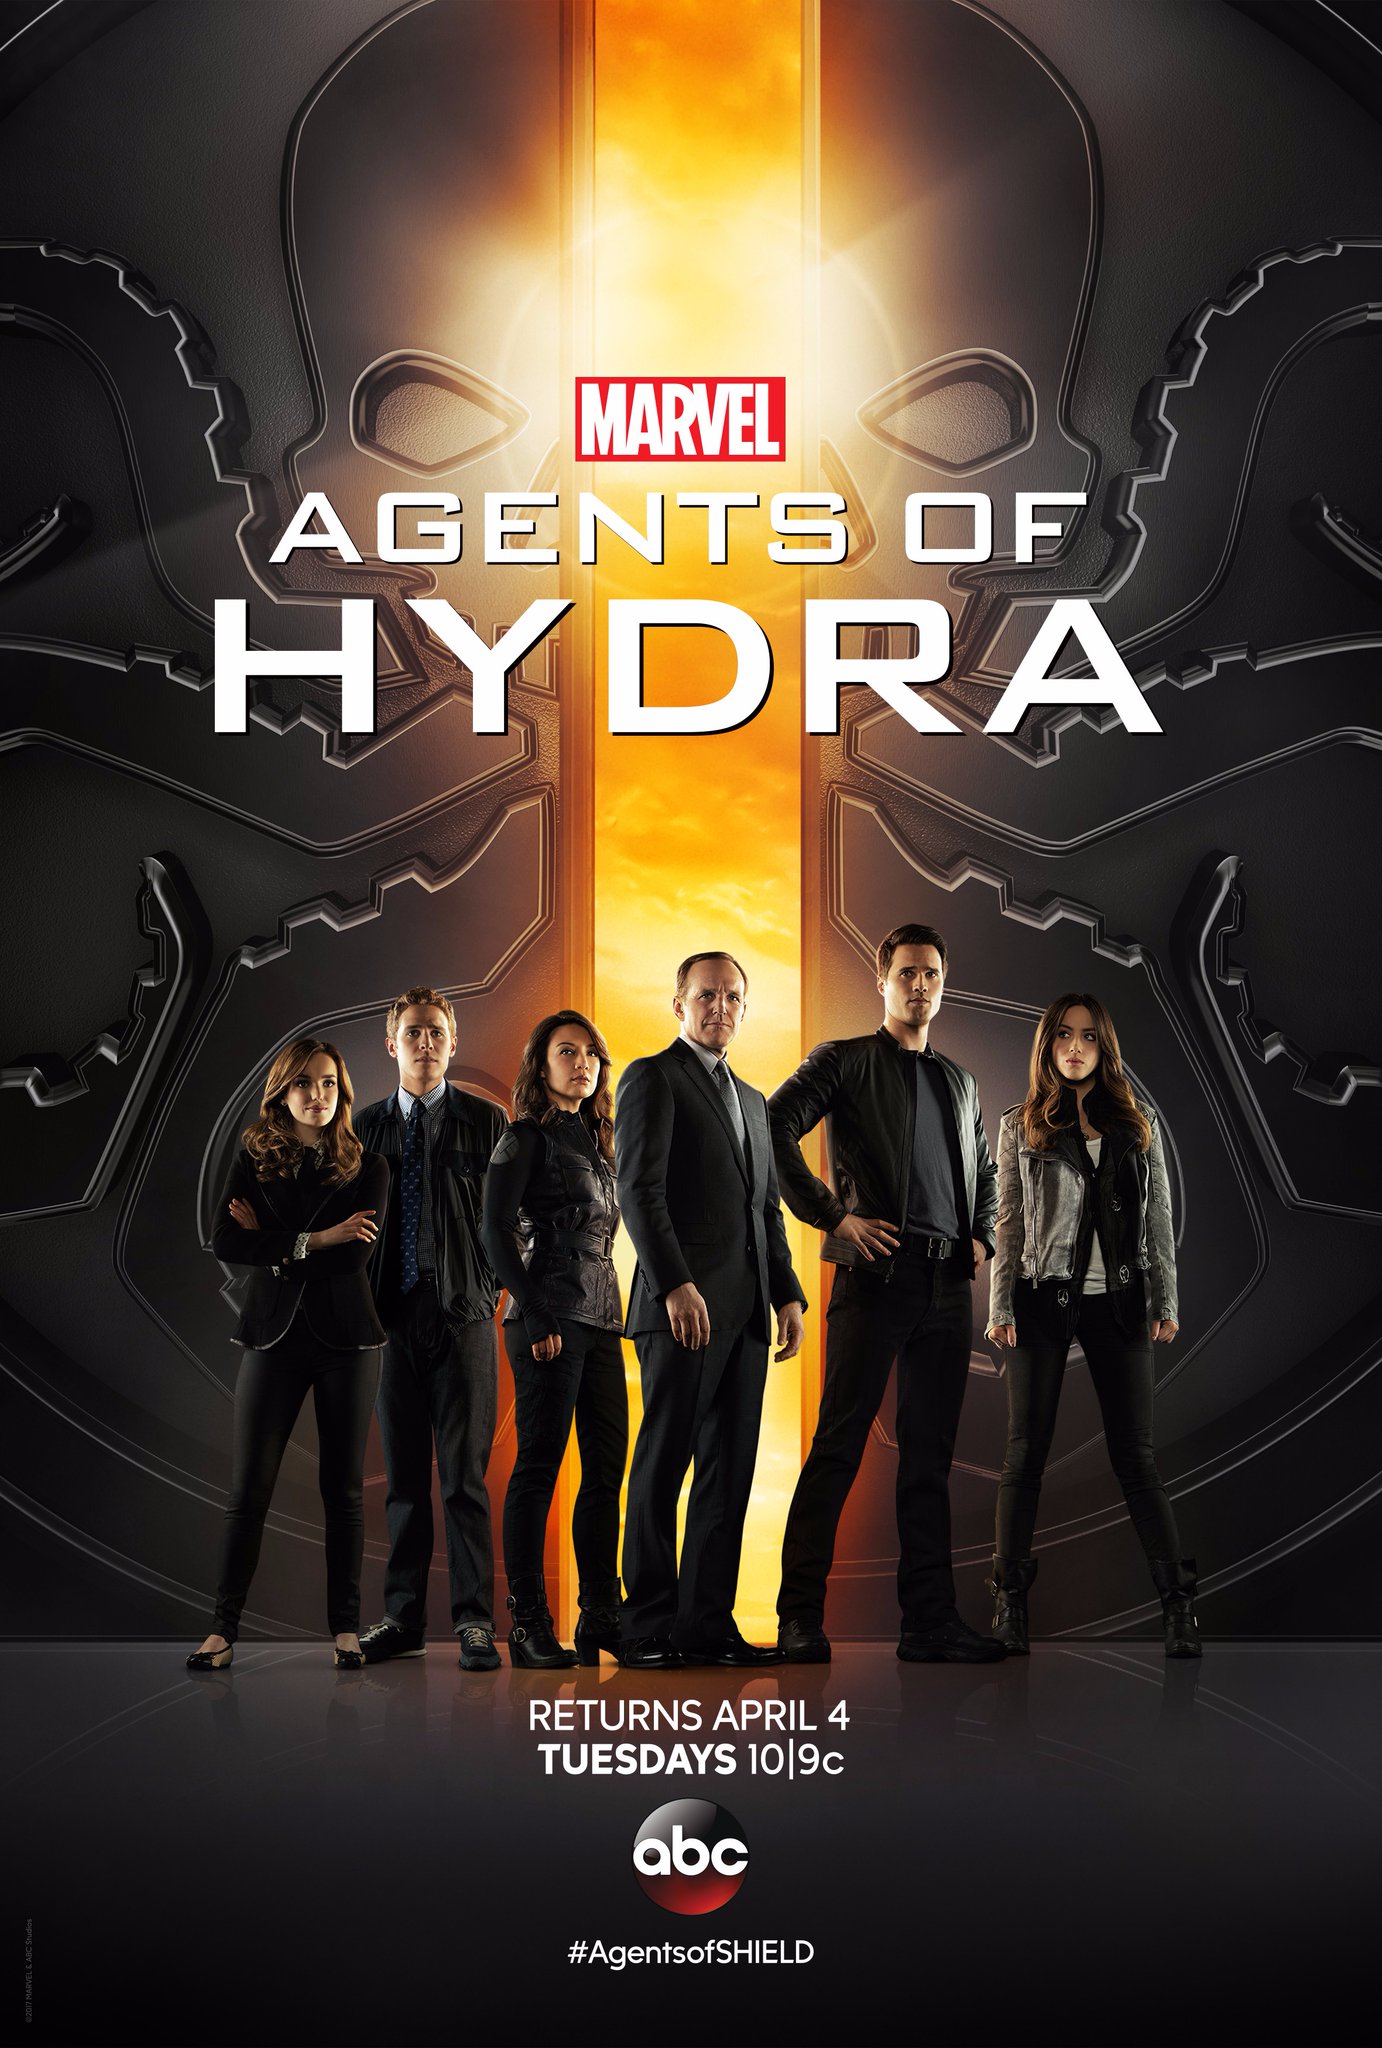 agents hydra 1 Agents of SHIELD Posters Tease Agents of HYDRA